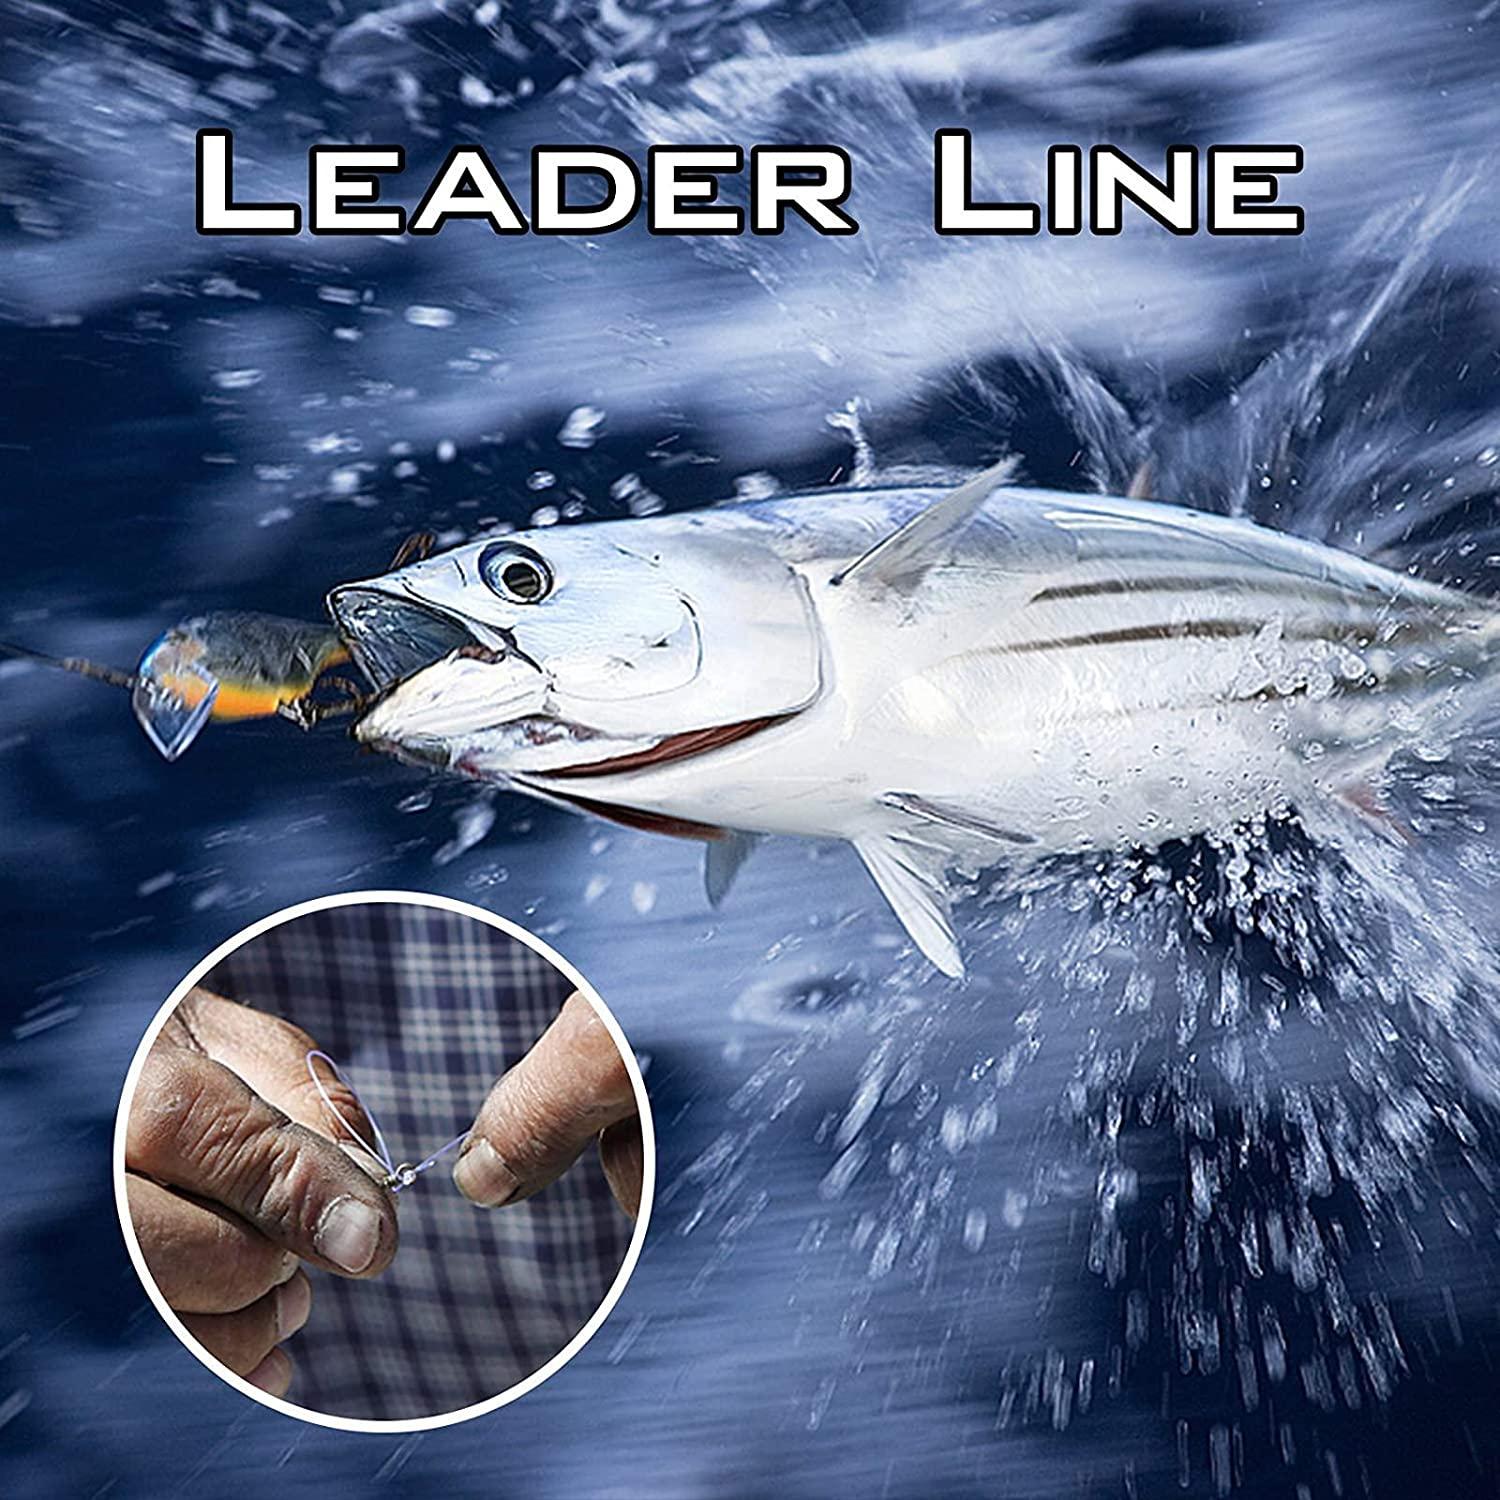 KastKing DuraBlend Monofilament Leader Line - Premium Saltwater Mono Leader  Materials - Big Game Spool Size 120Yds/110M Clear 40 LB (Wound on Spool)  0.55mm